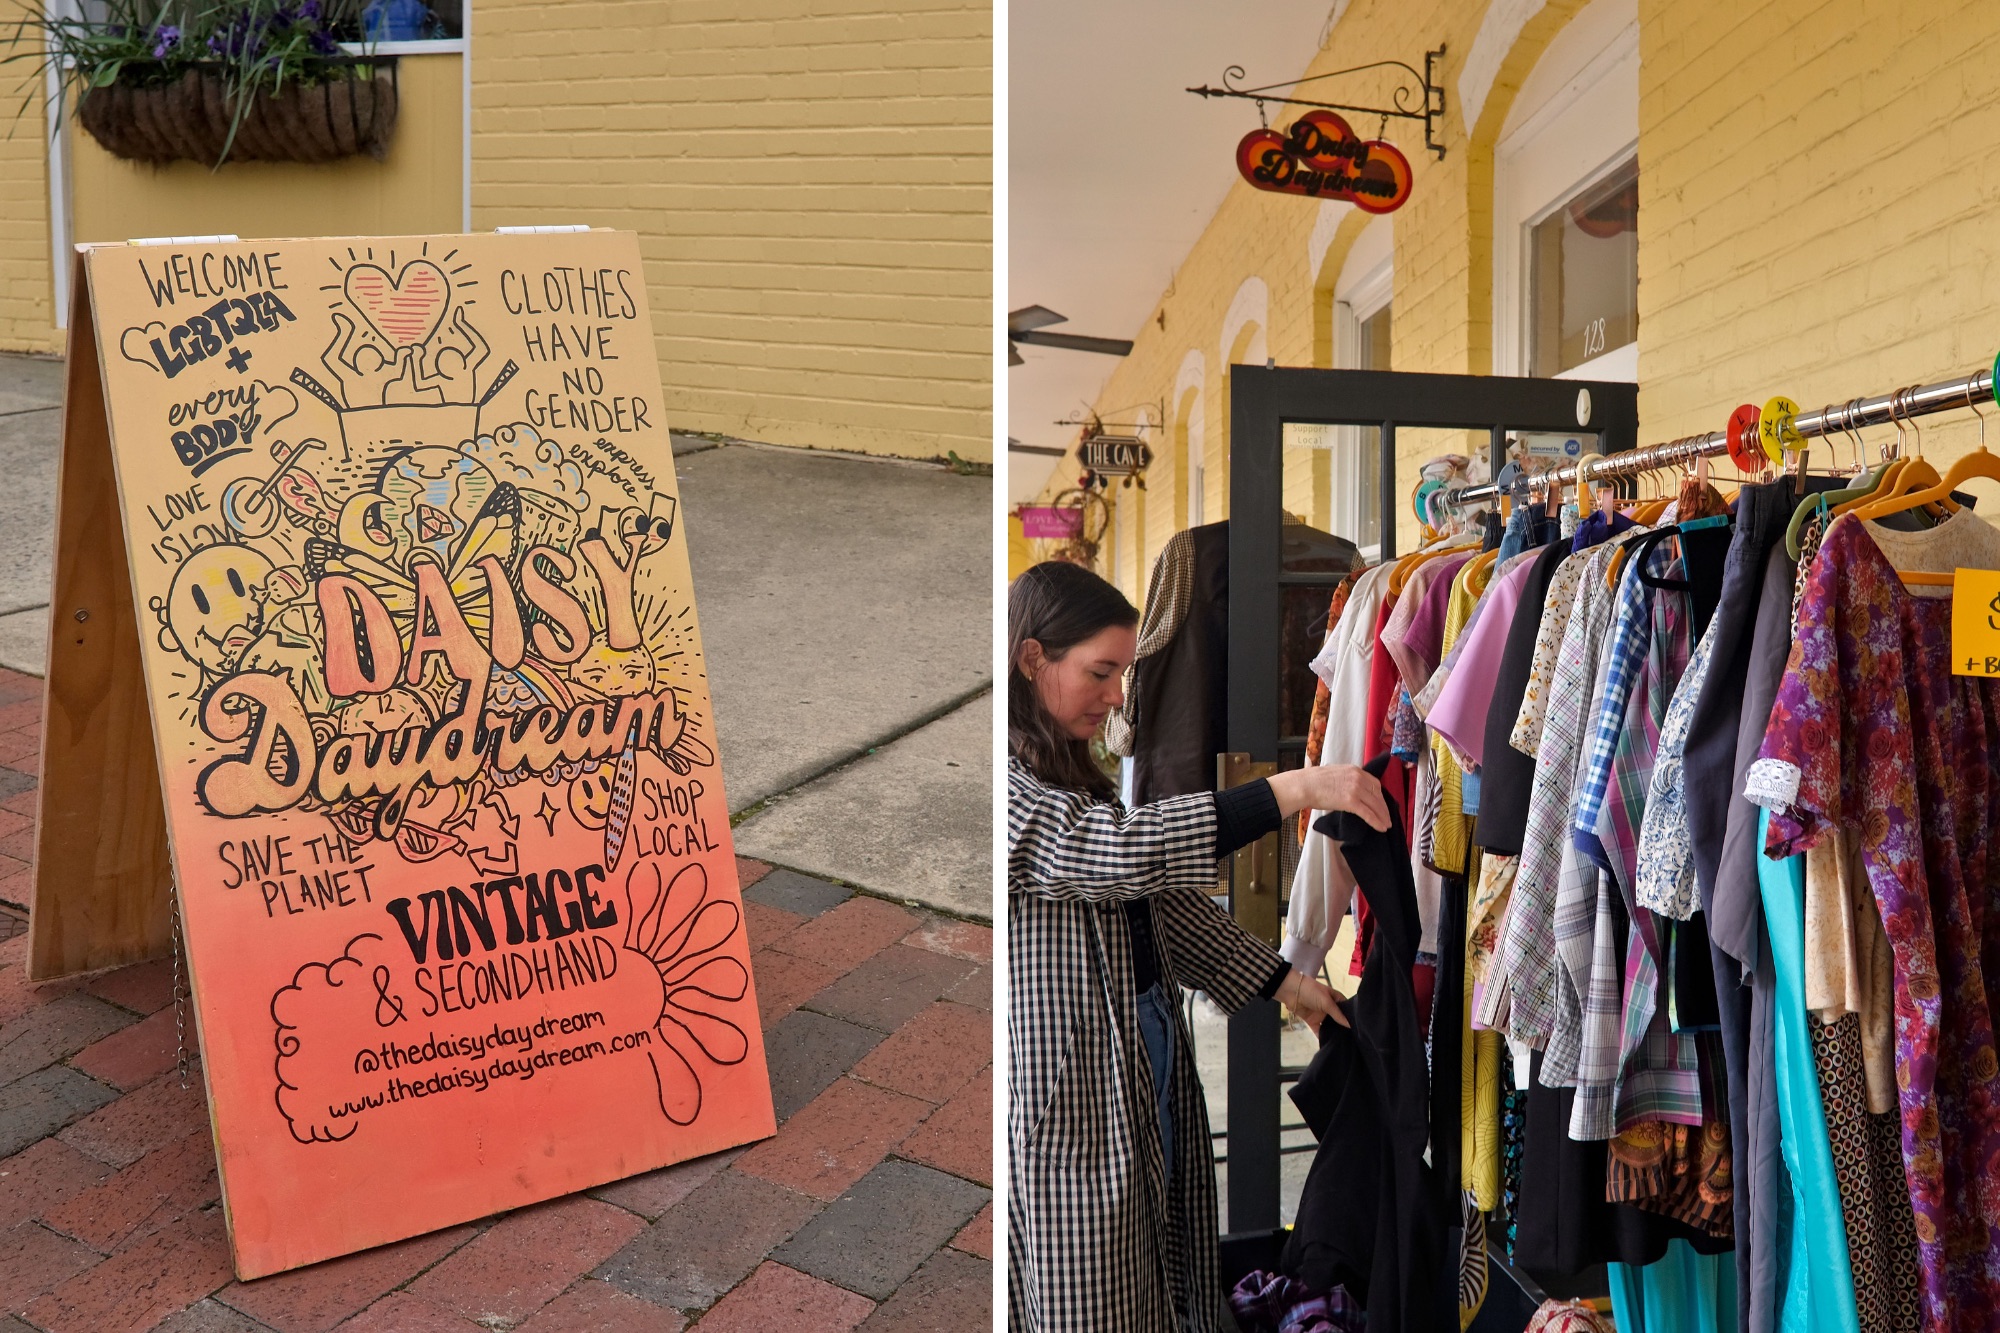 Two images: a sign advertising Daisy Daydream, and Alyssa shopping a rack of vintage clothing